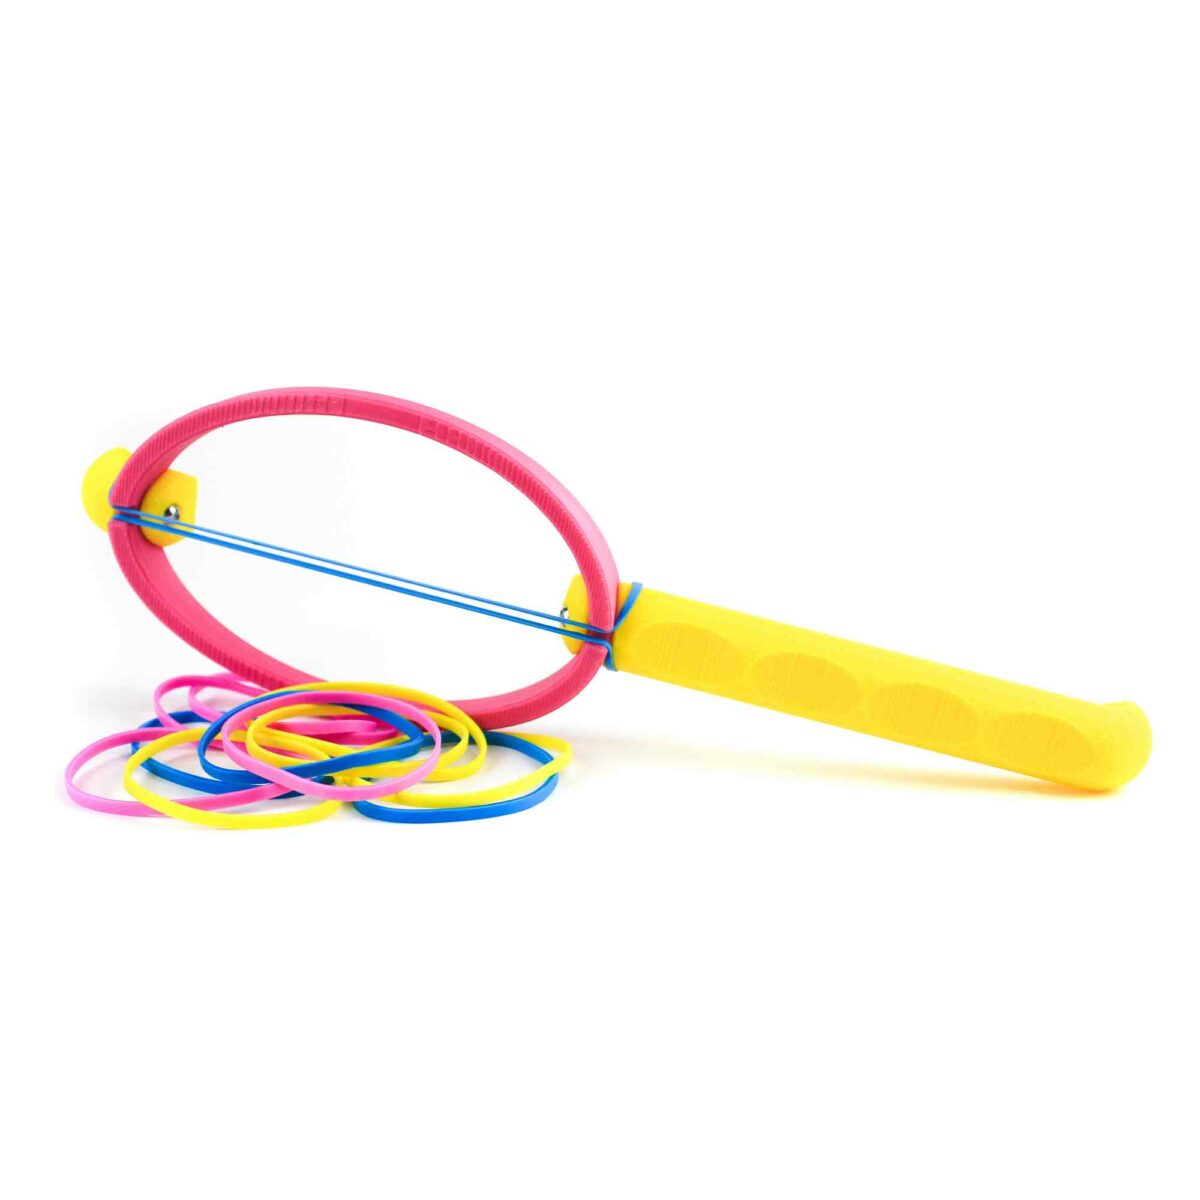 The Original Snapper, an impact play toy by Terrible Toyshop - our signature rubber band impact play toy